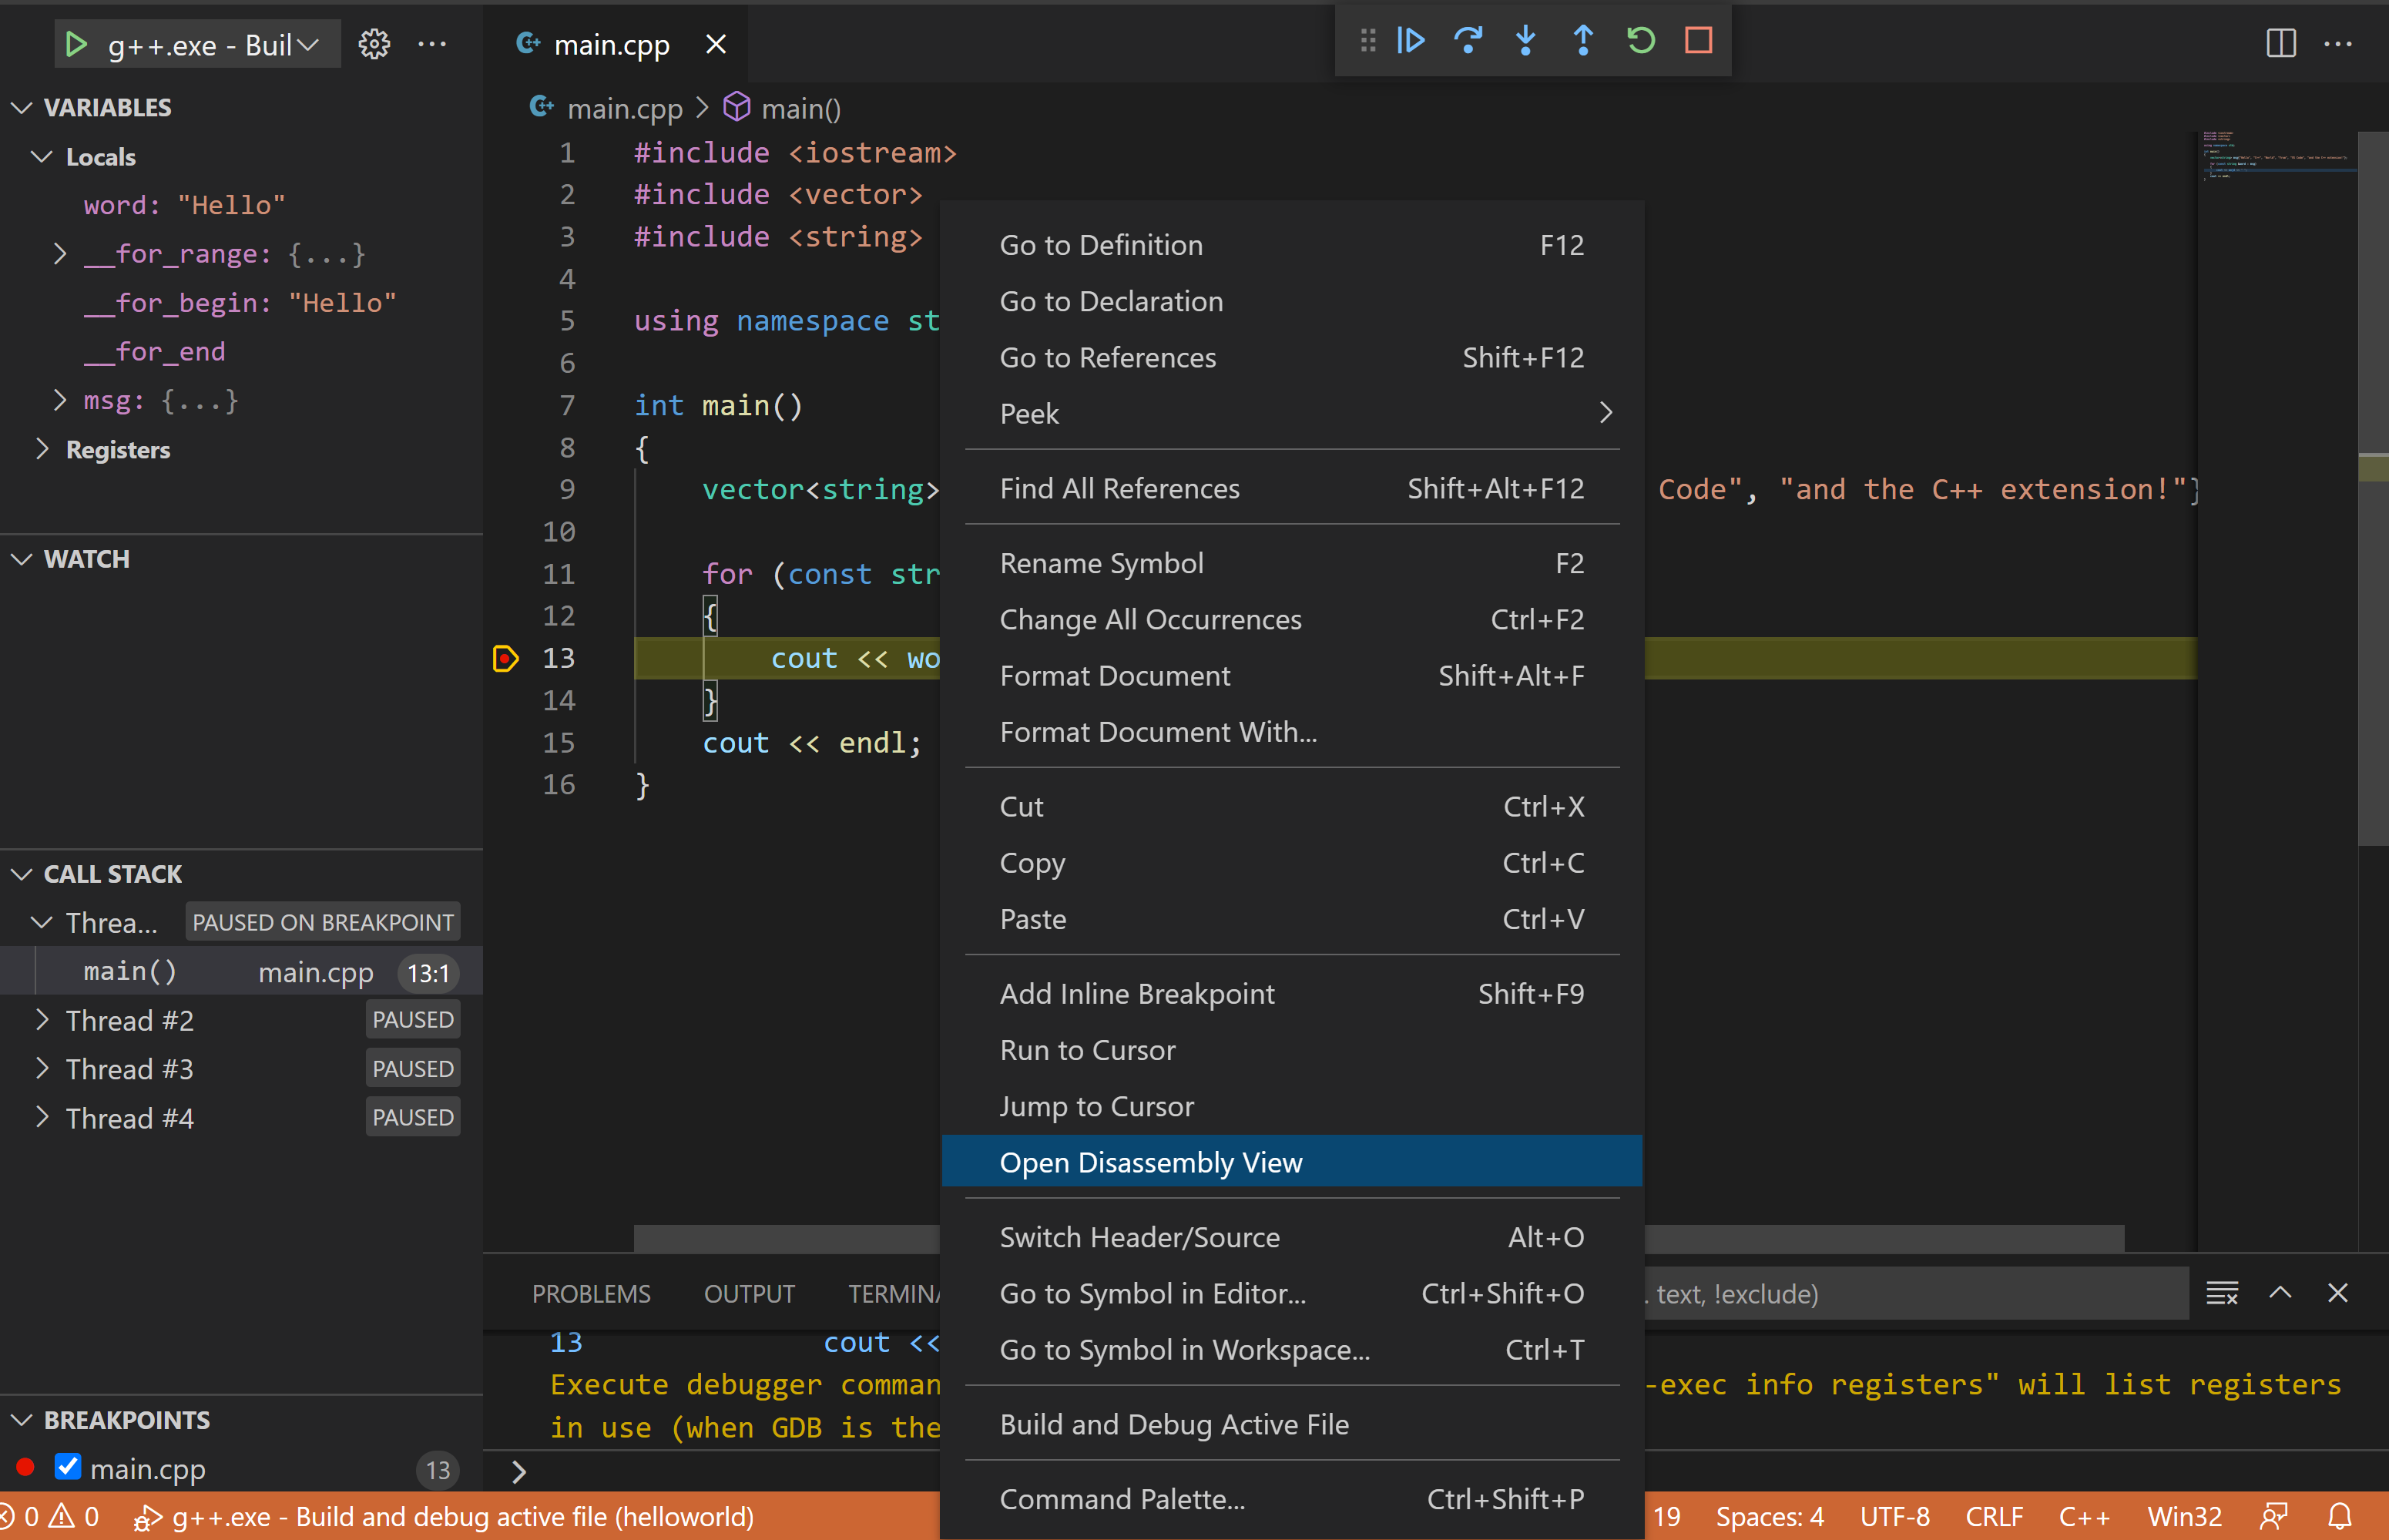 Visual Studio Code C++ July 2021 Update: Disassembly View, Macro Expansion And Windows Arm64 Debugging - C++ Team Blog